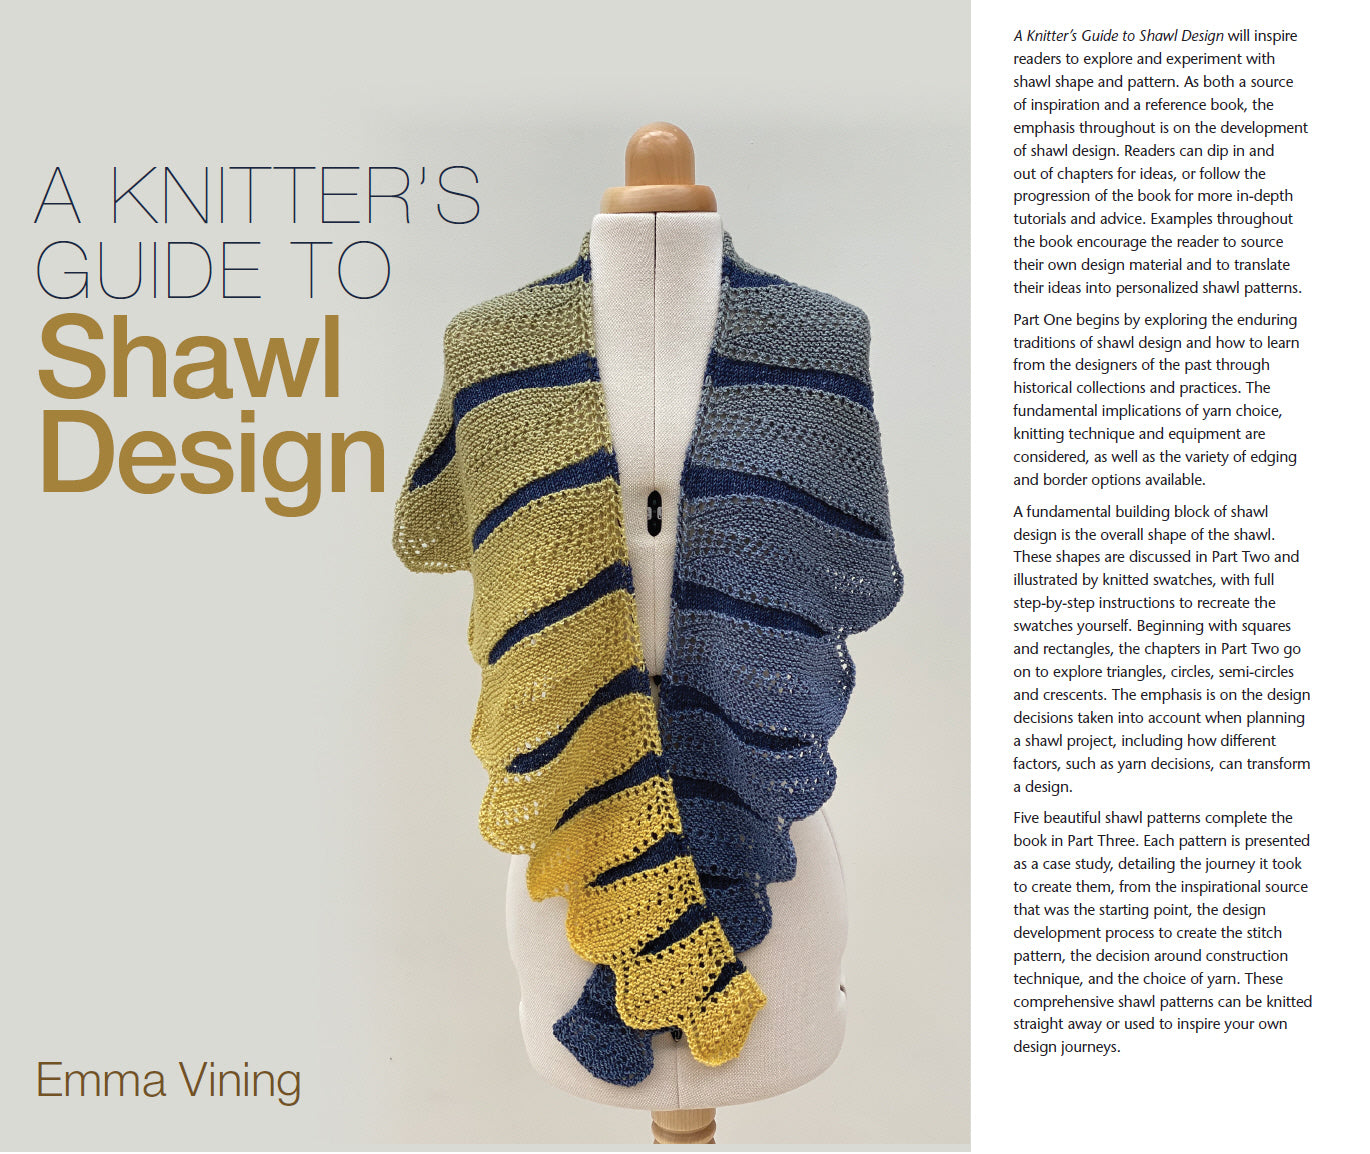 Knitter's Guide to Shawl Design